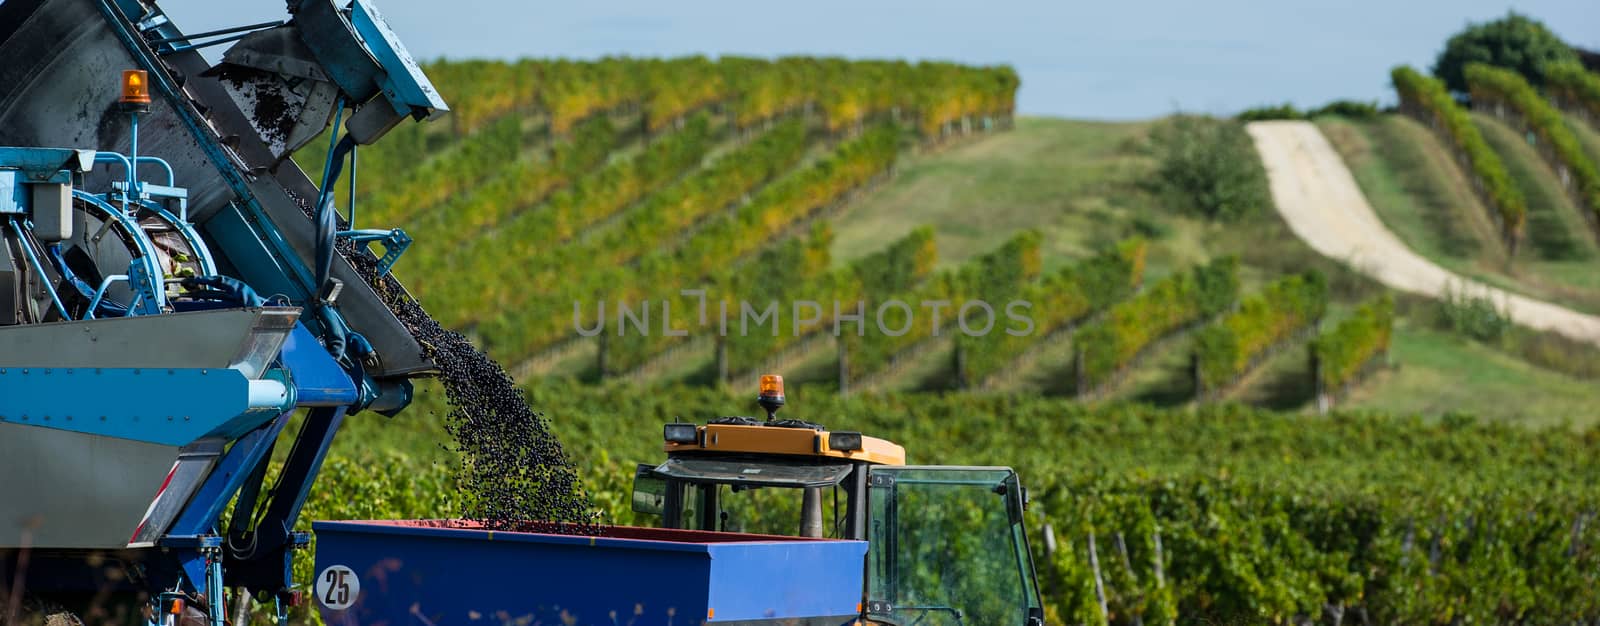 Mechanical harvesting of grapes in the vineyard, France